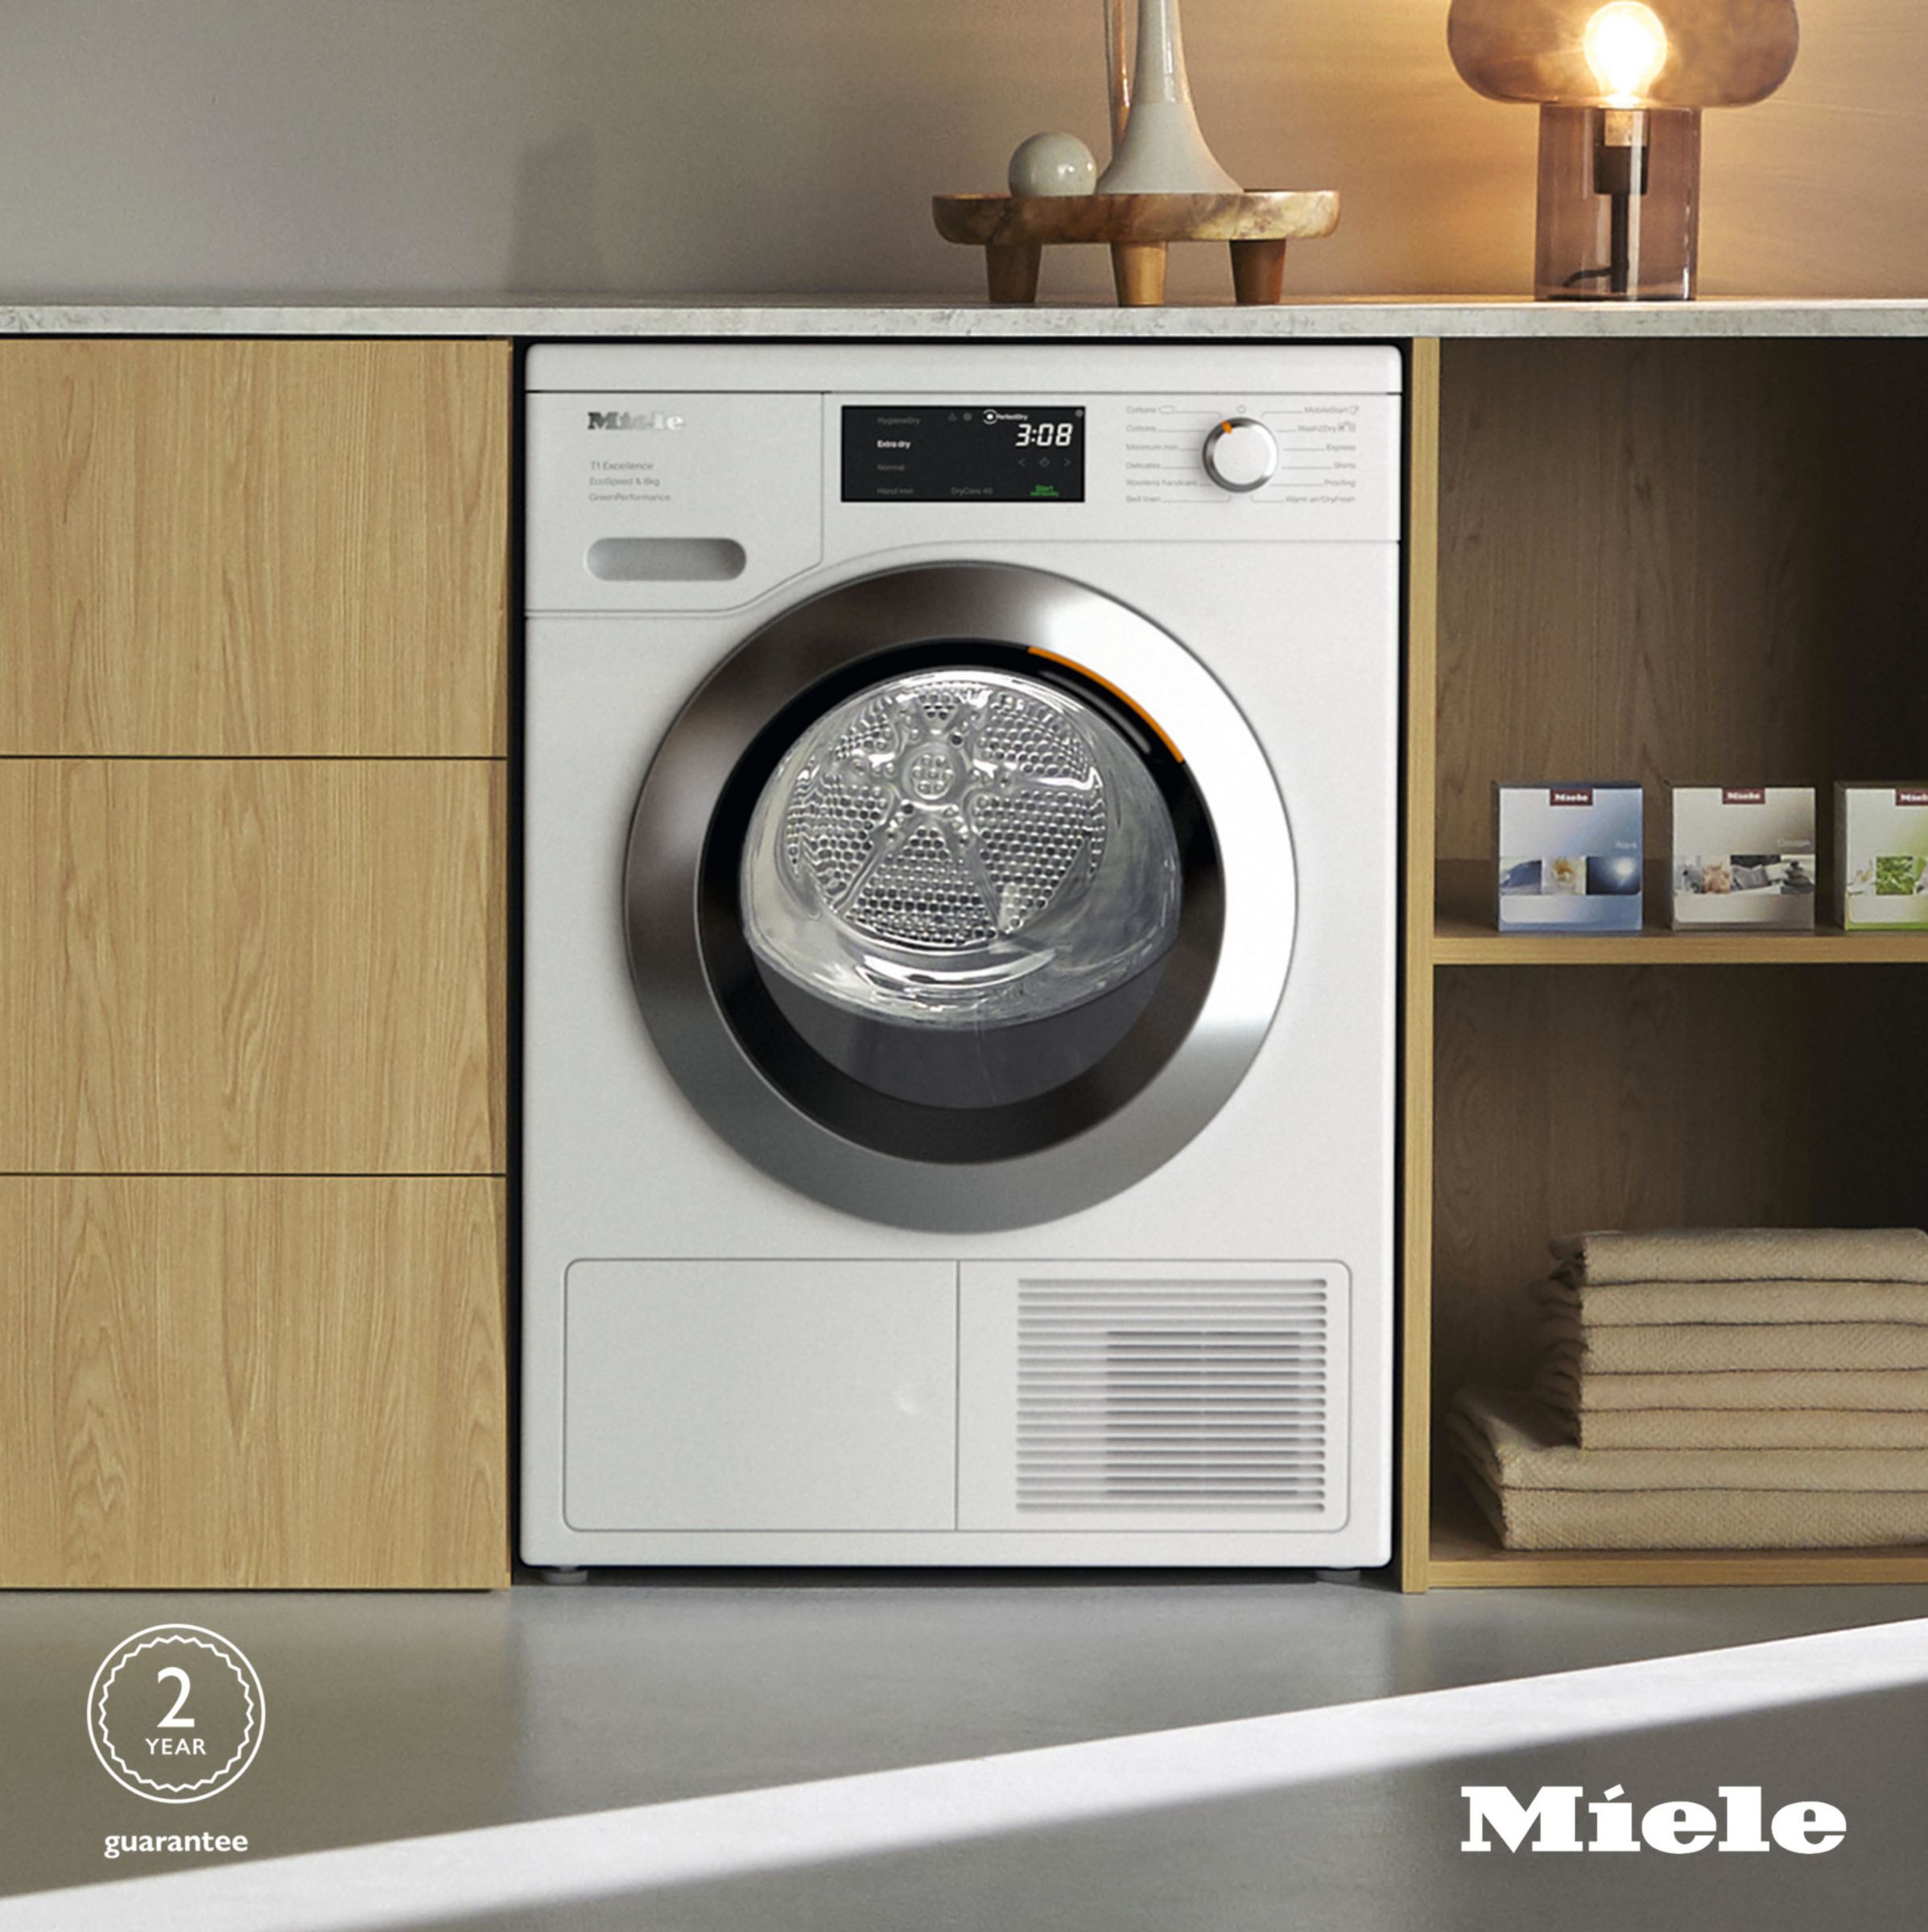 Save up to £130 on Miele Washing Machines & Tumble Dryers